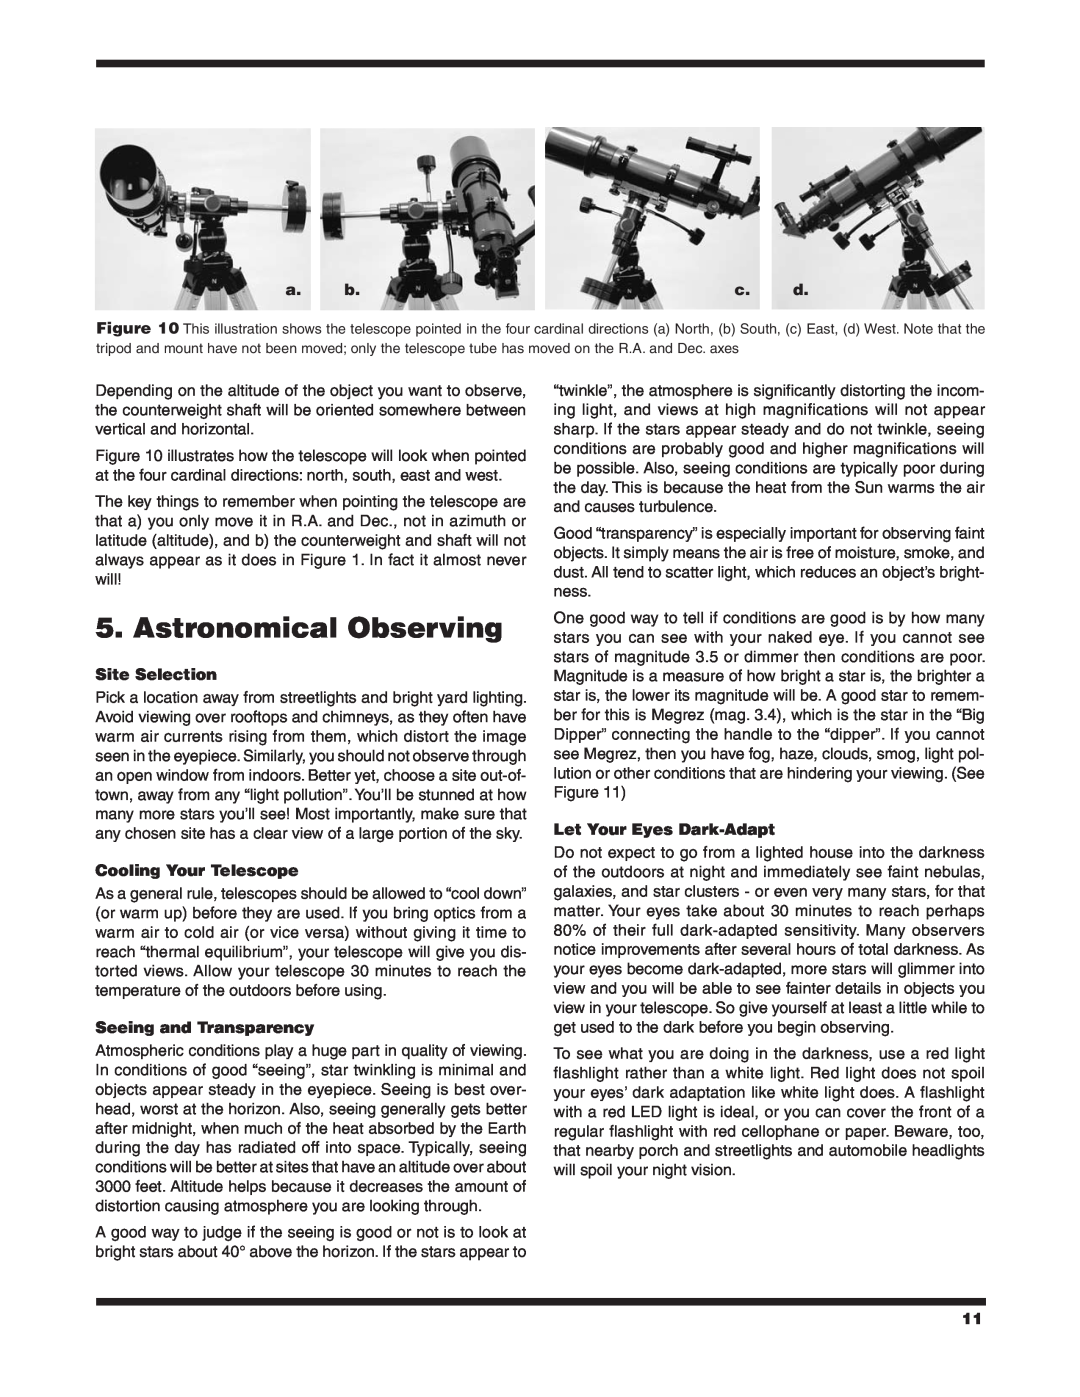 Orion 9862 instruction manual Astronomical Observing, Site Selection, Cooling Your Telescope, Seeing and Transparency 